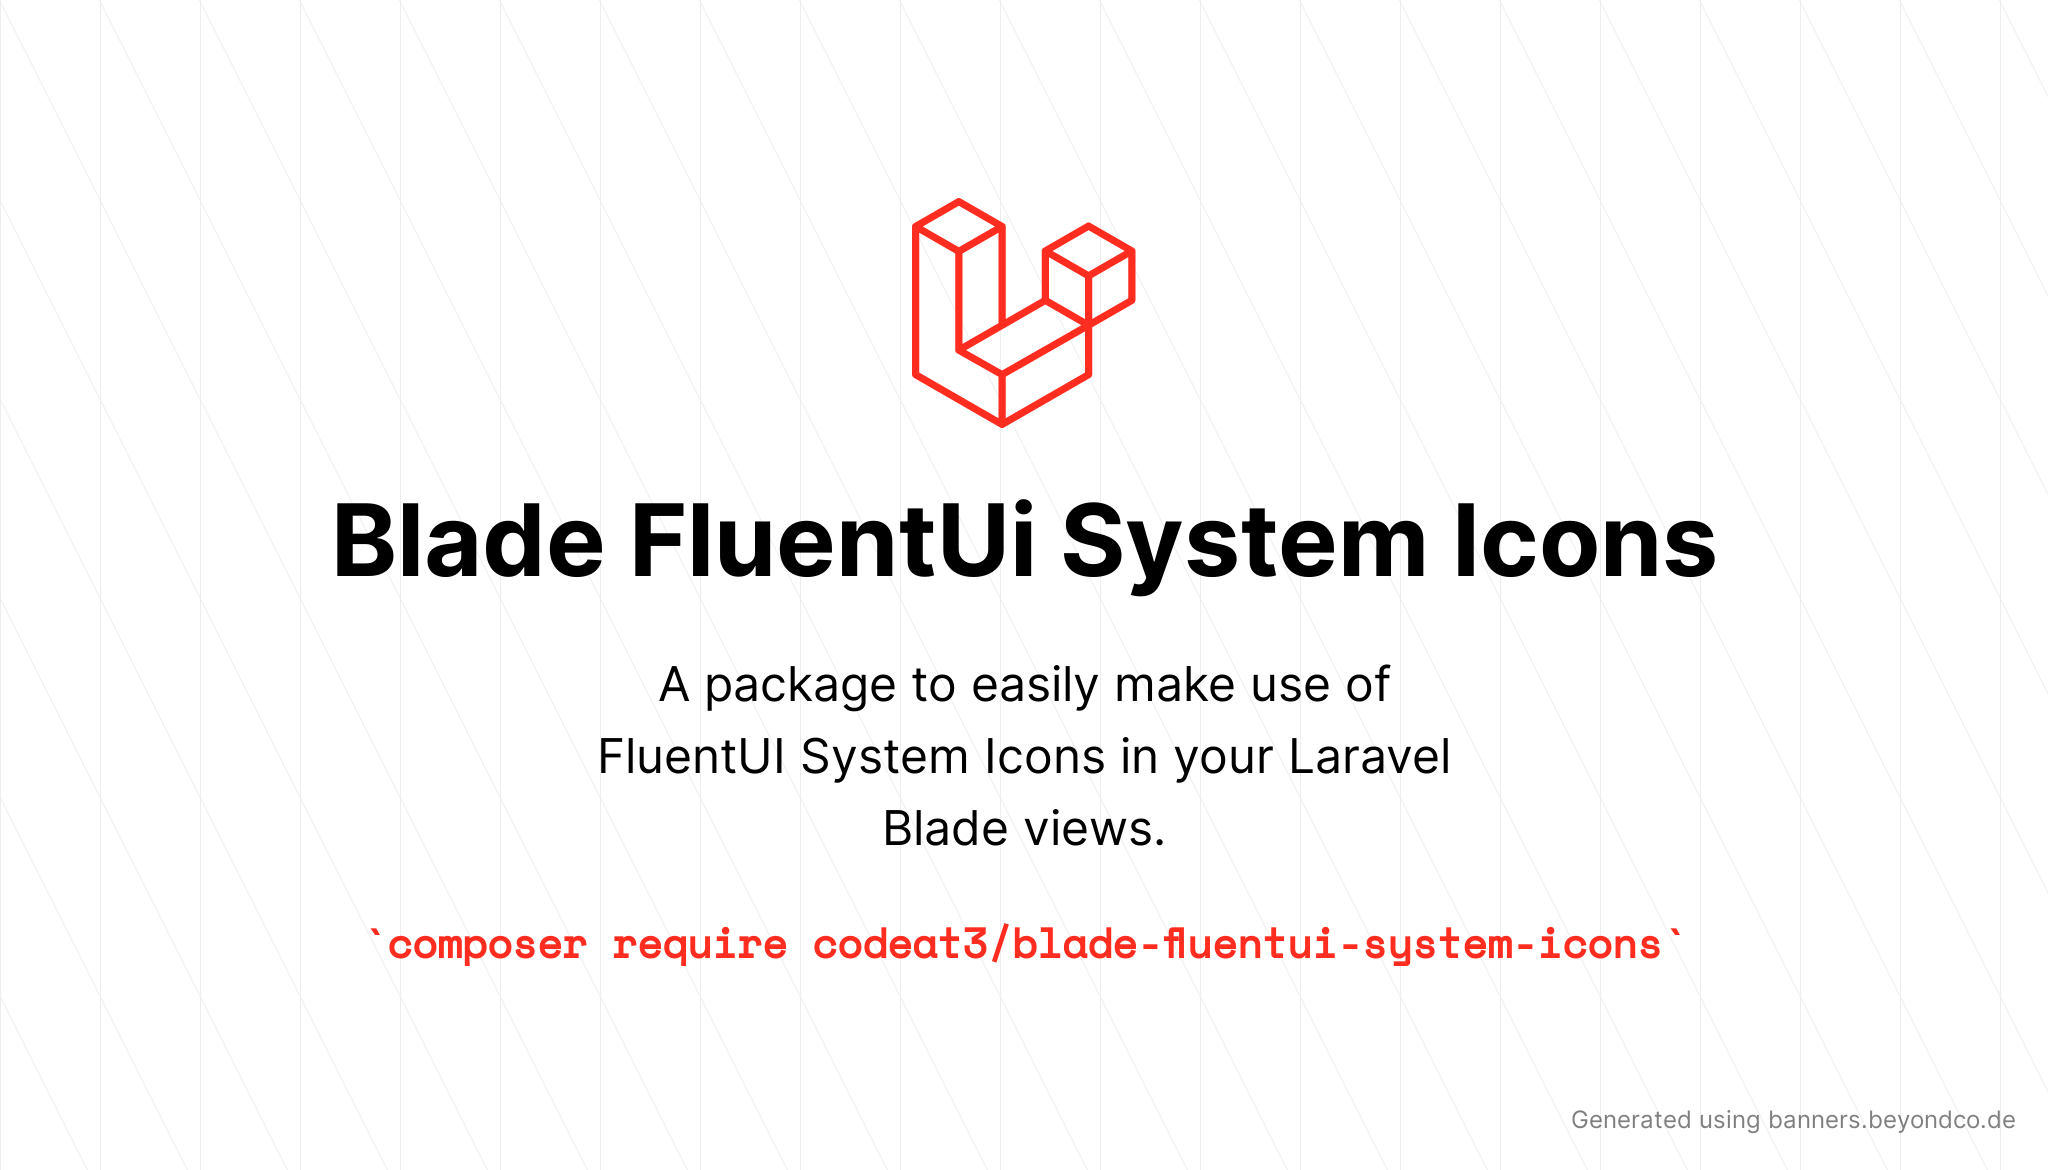 socialcard-blade-fluentui-system-icons.png